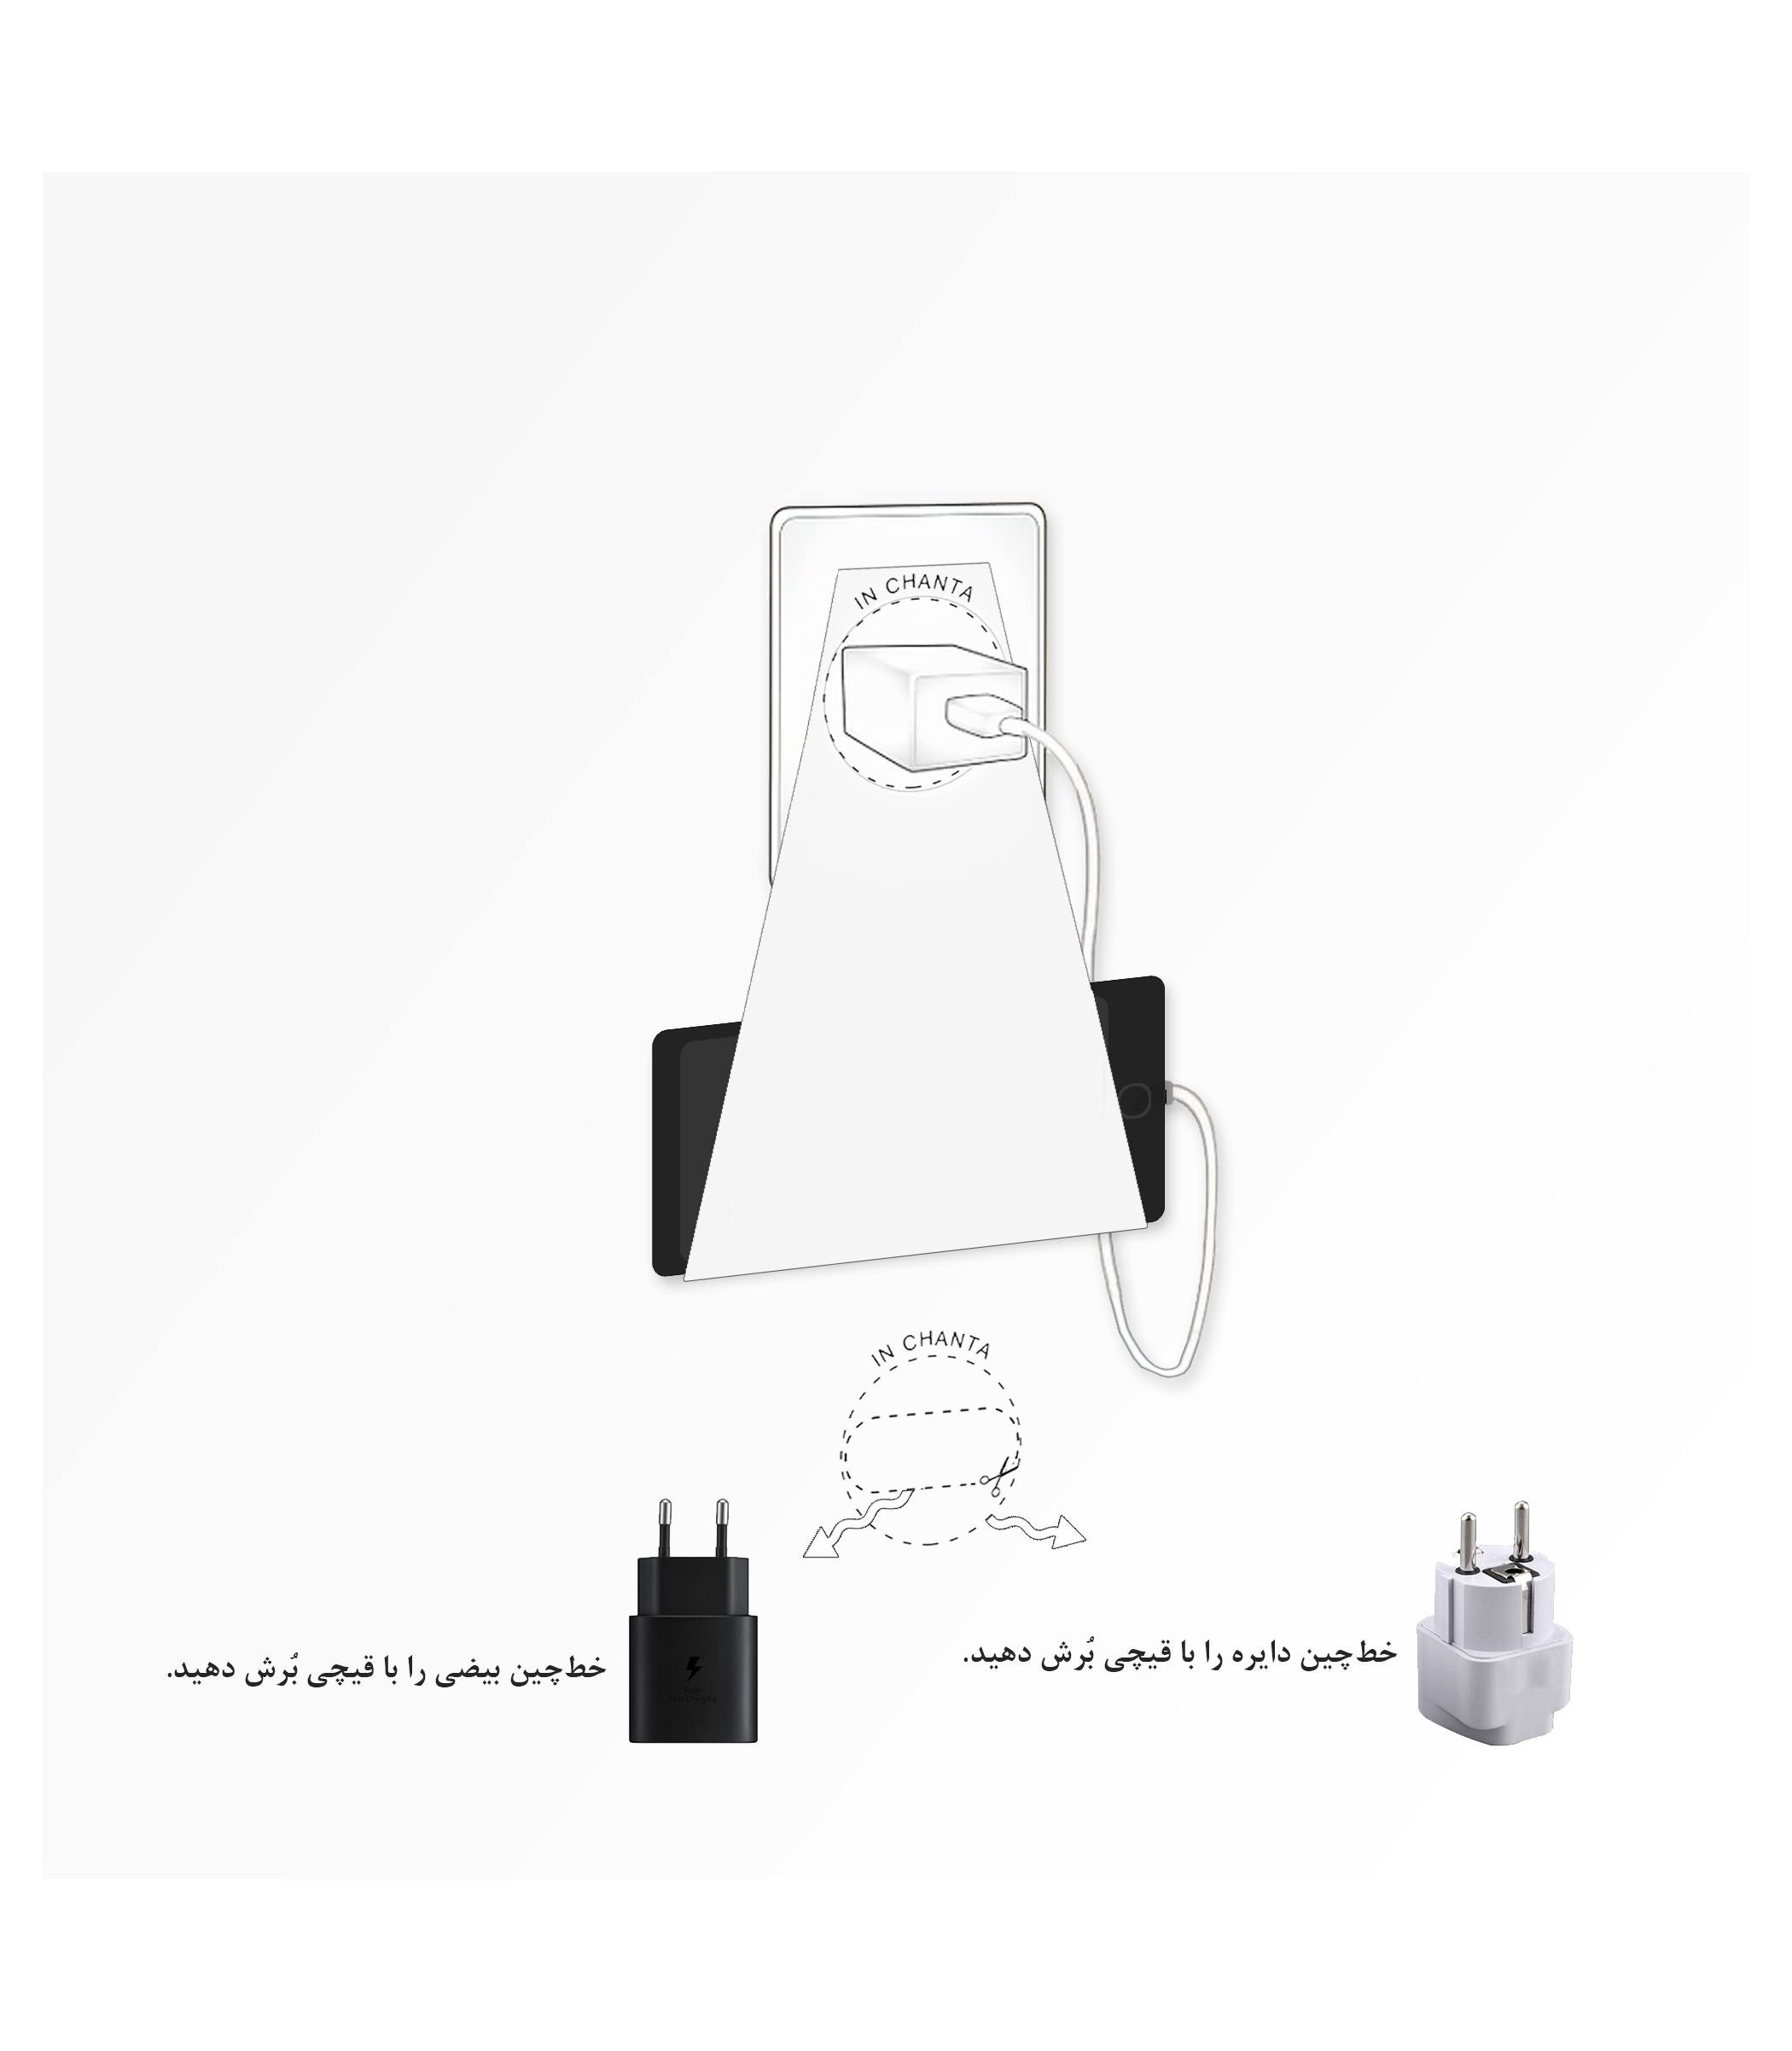 wall-hanging-pocket-mobile-charger4